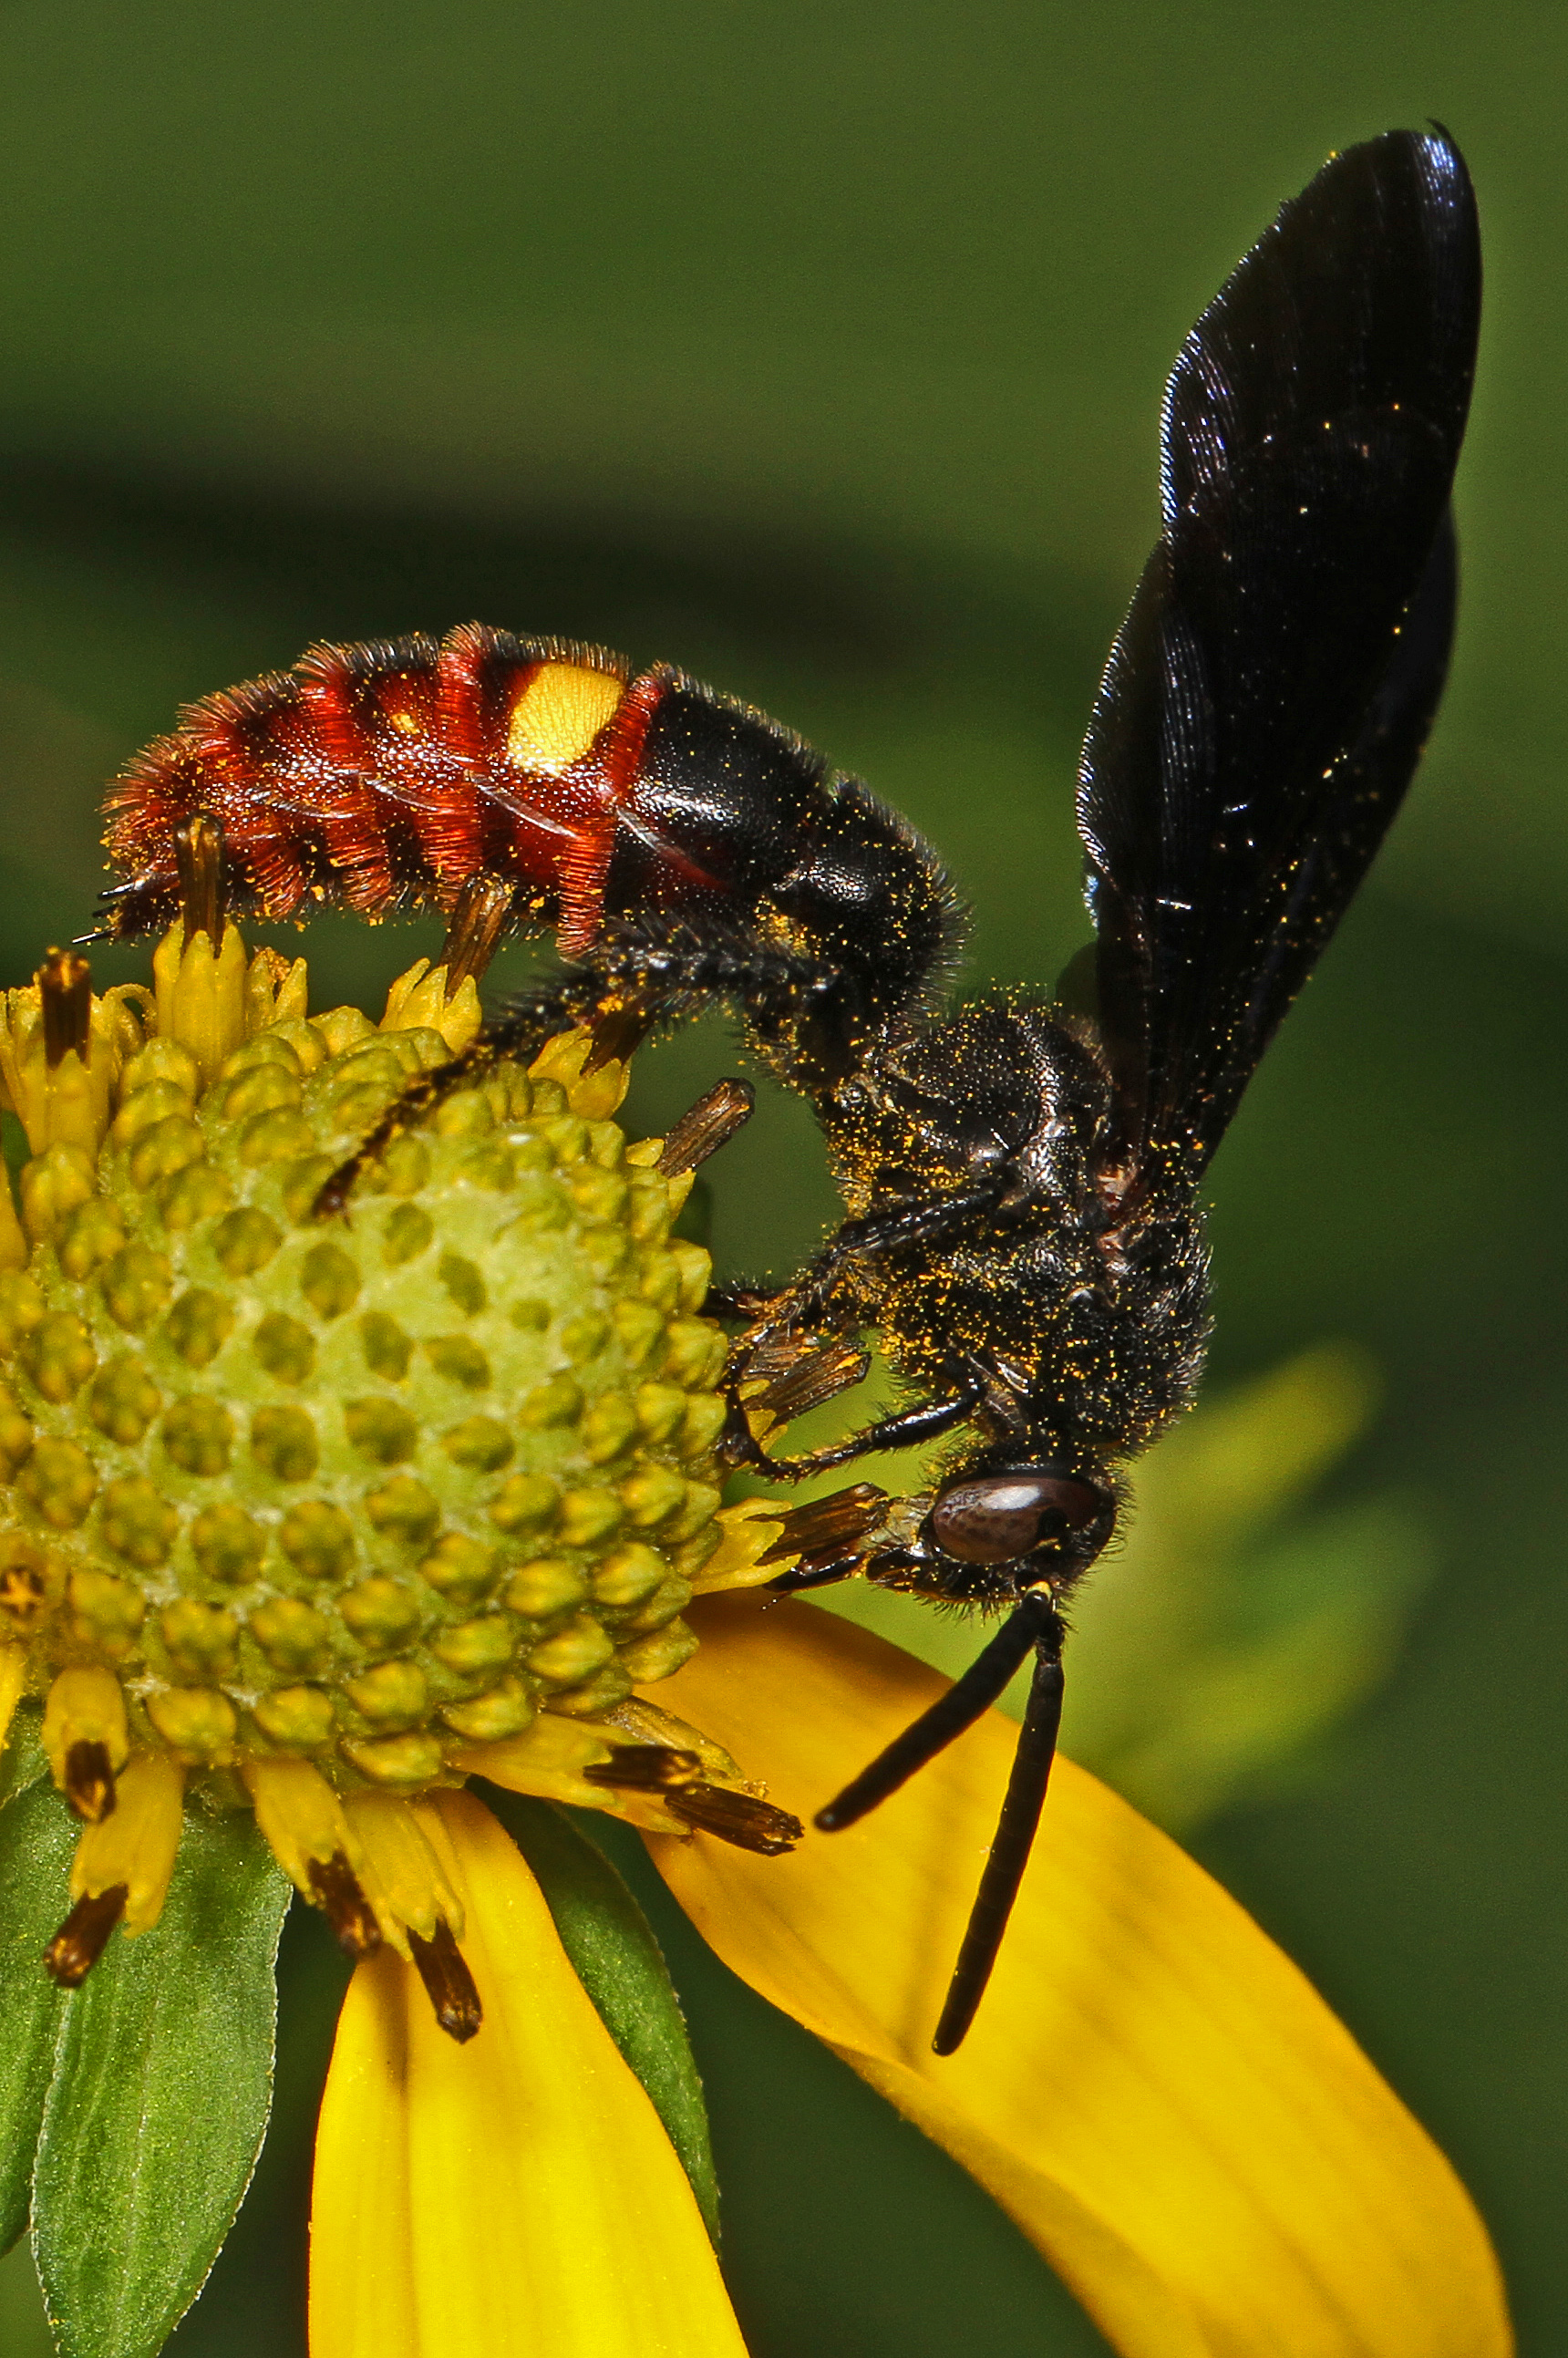 A black wasp with a bright orange abdomen with a yellow spot sits on a yellow cone flower head.